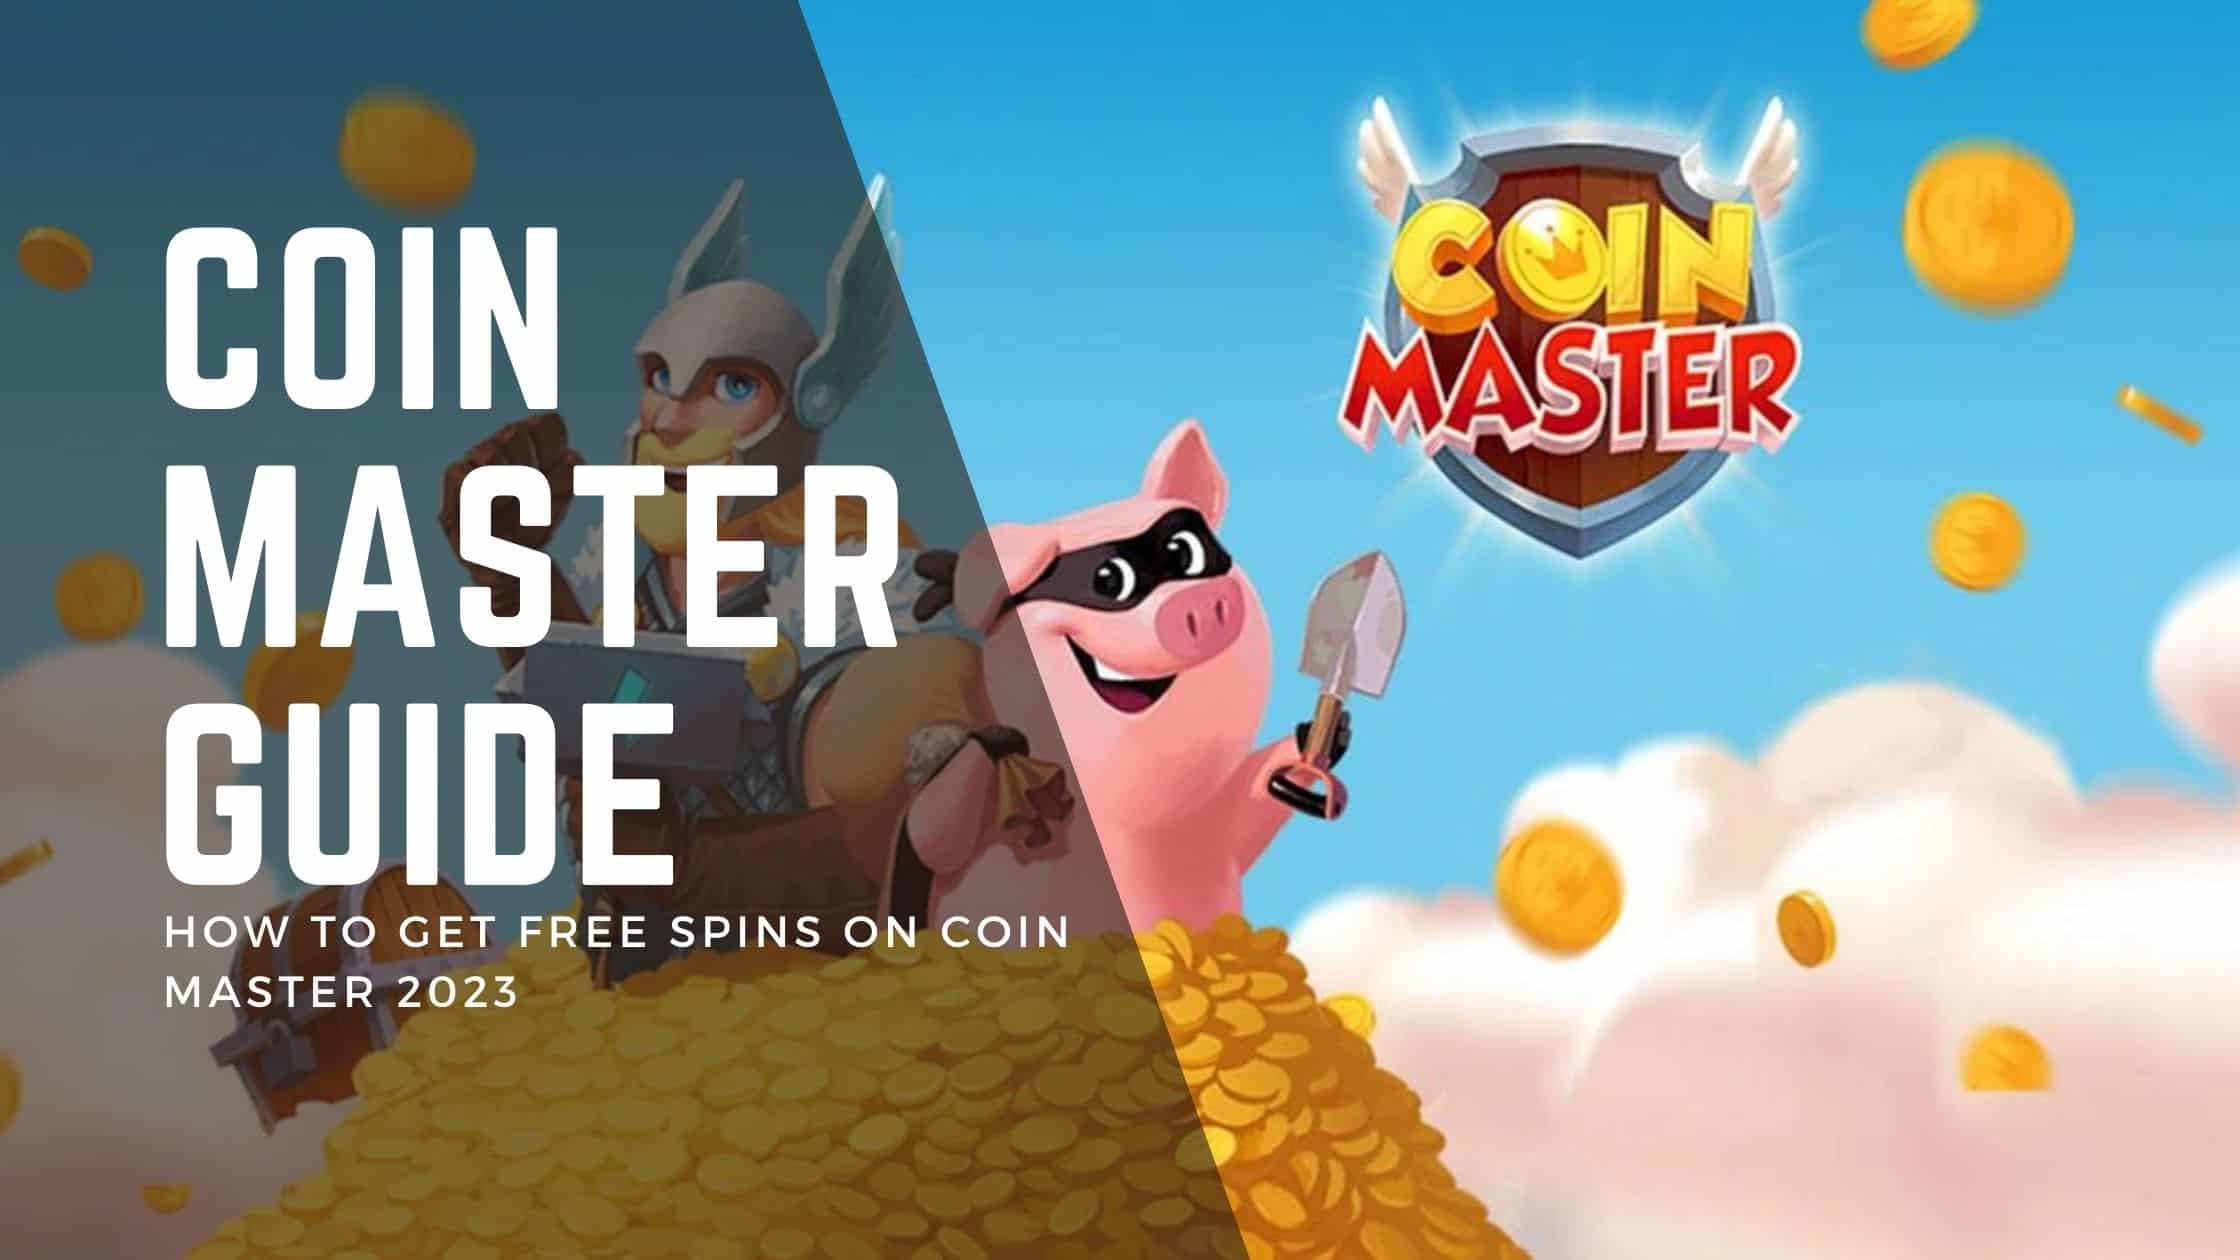 Coin Master Guide How to get free spins on Coin Master 2023